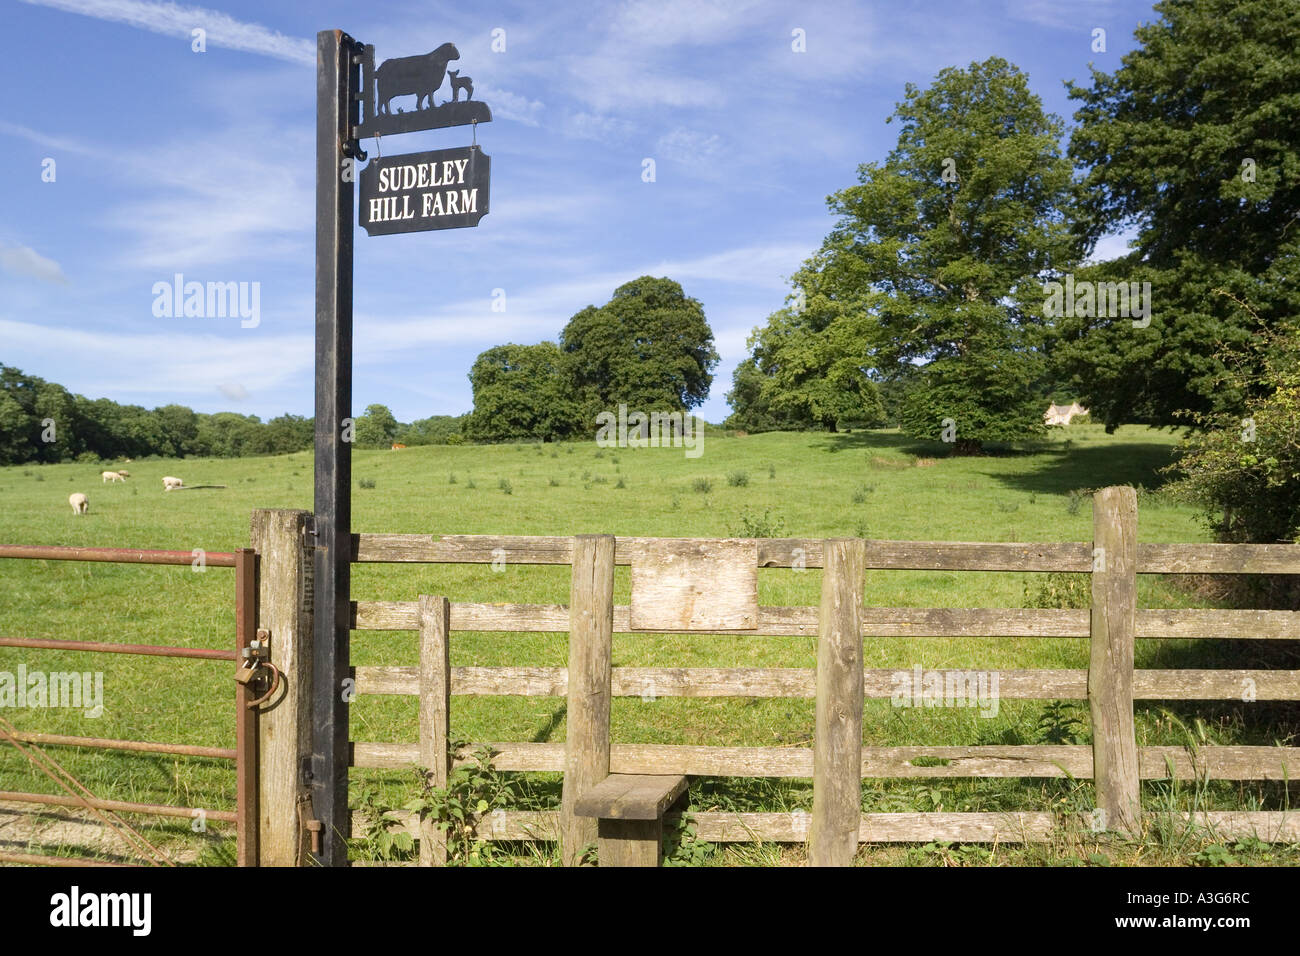 Stile on a public footpath beside Sudeley Hill Farm in the Cotswolds near Winchcombe Gloucestershire Stock Photo